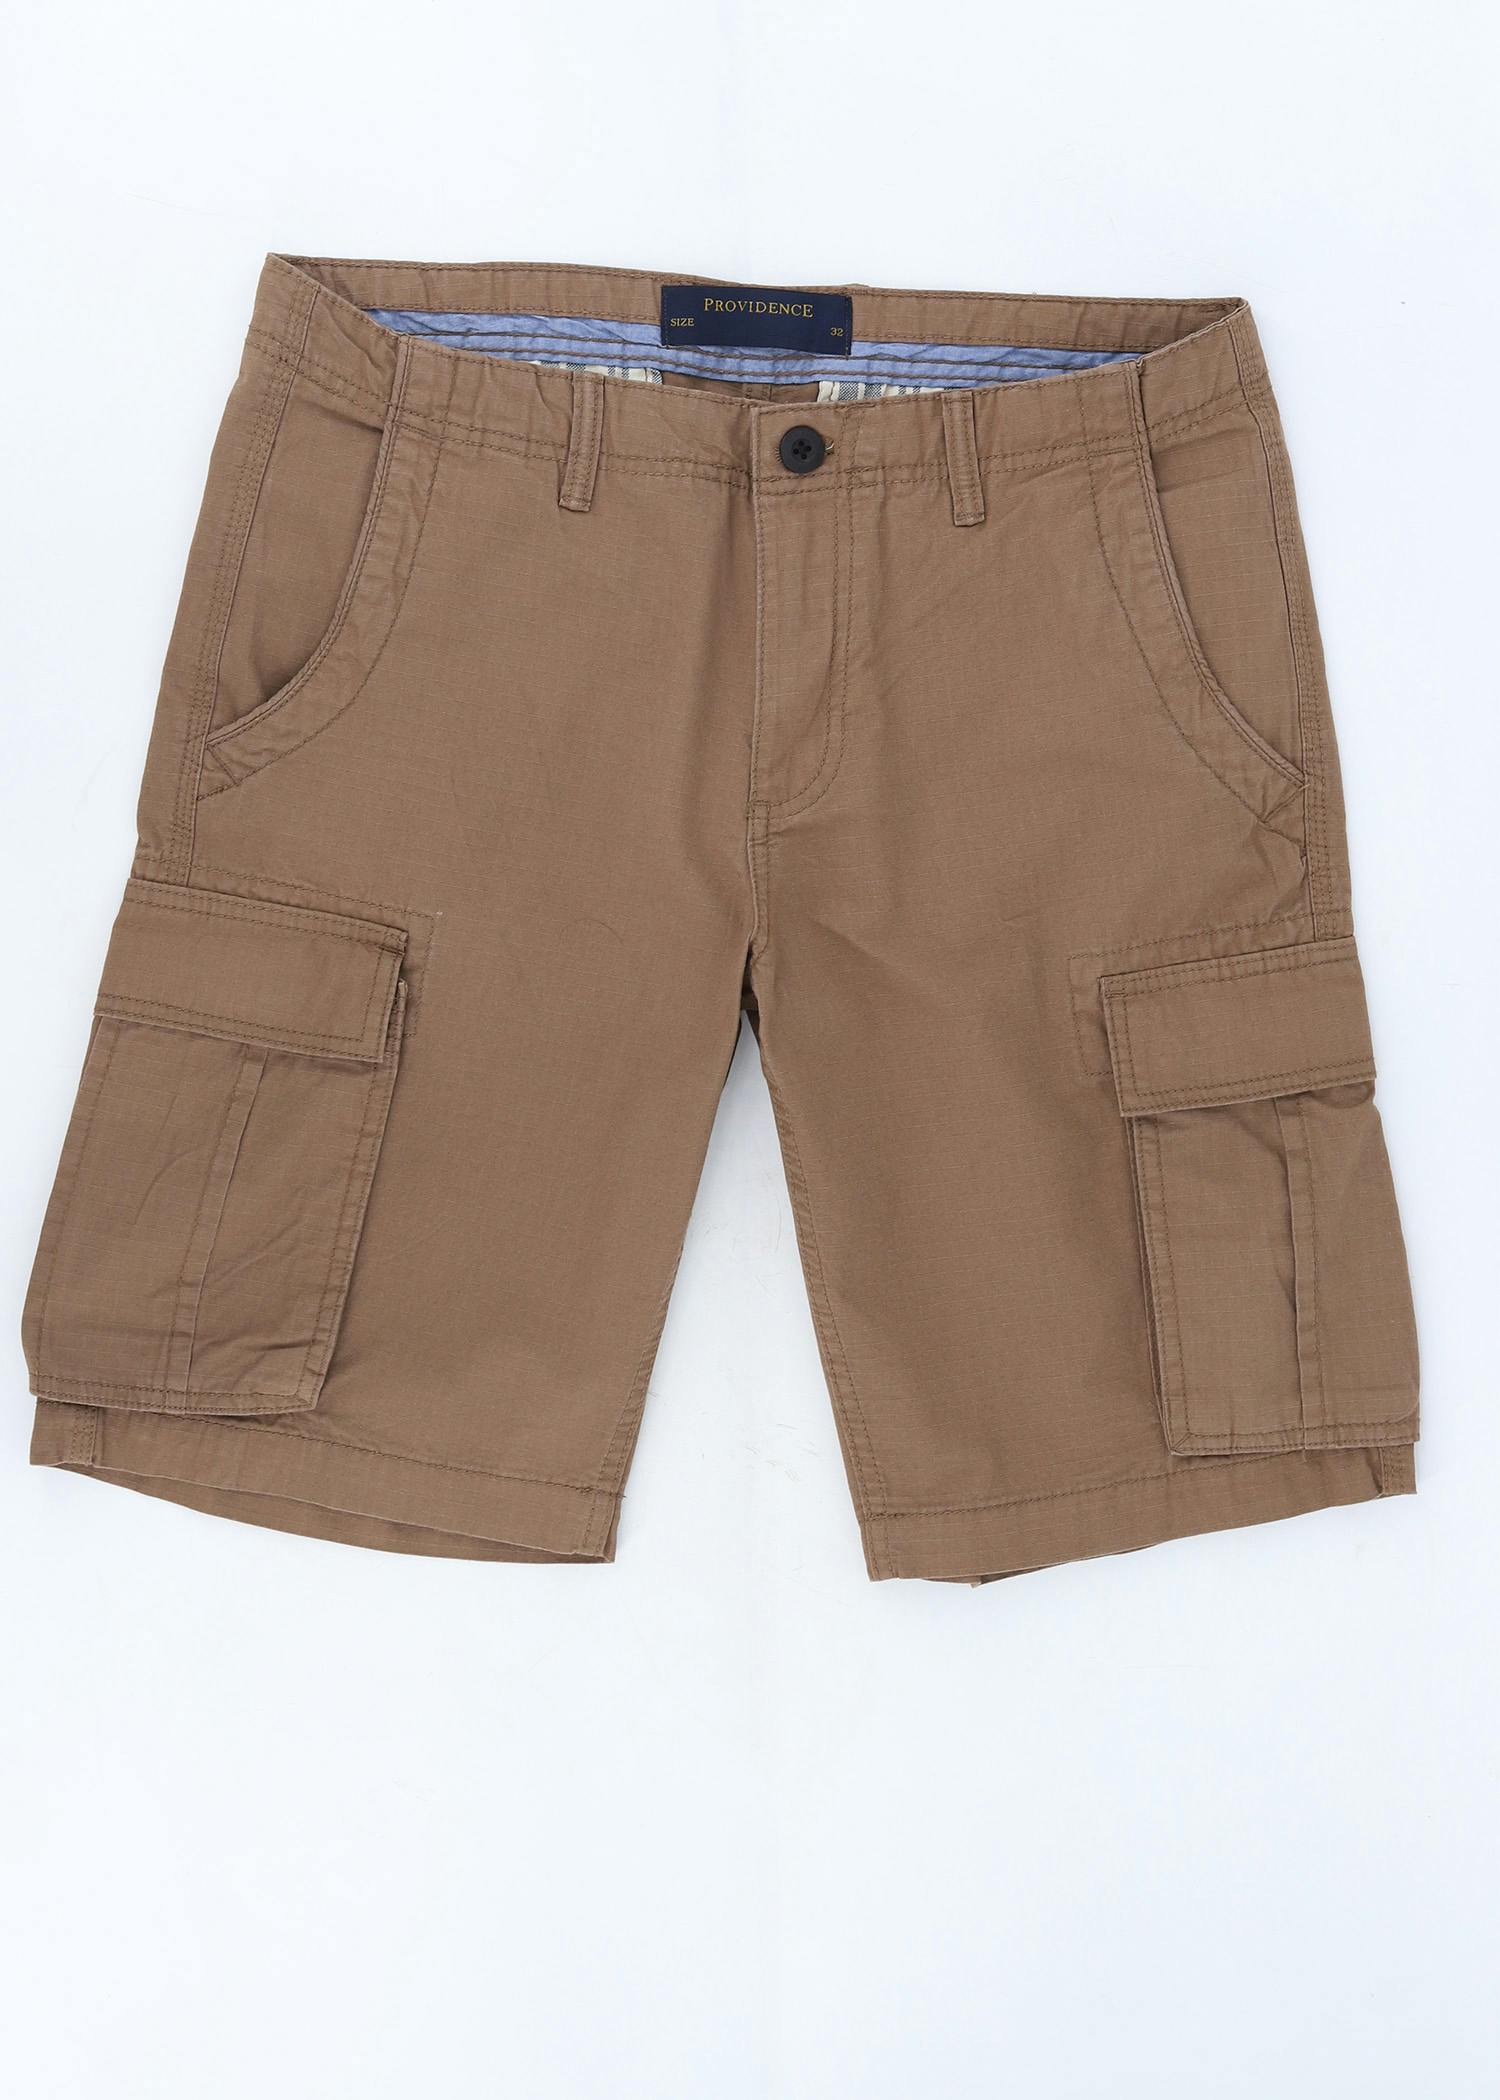 vulture iv cargo short brown color front view